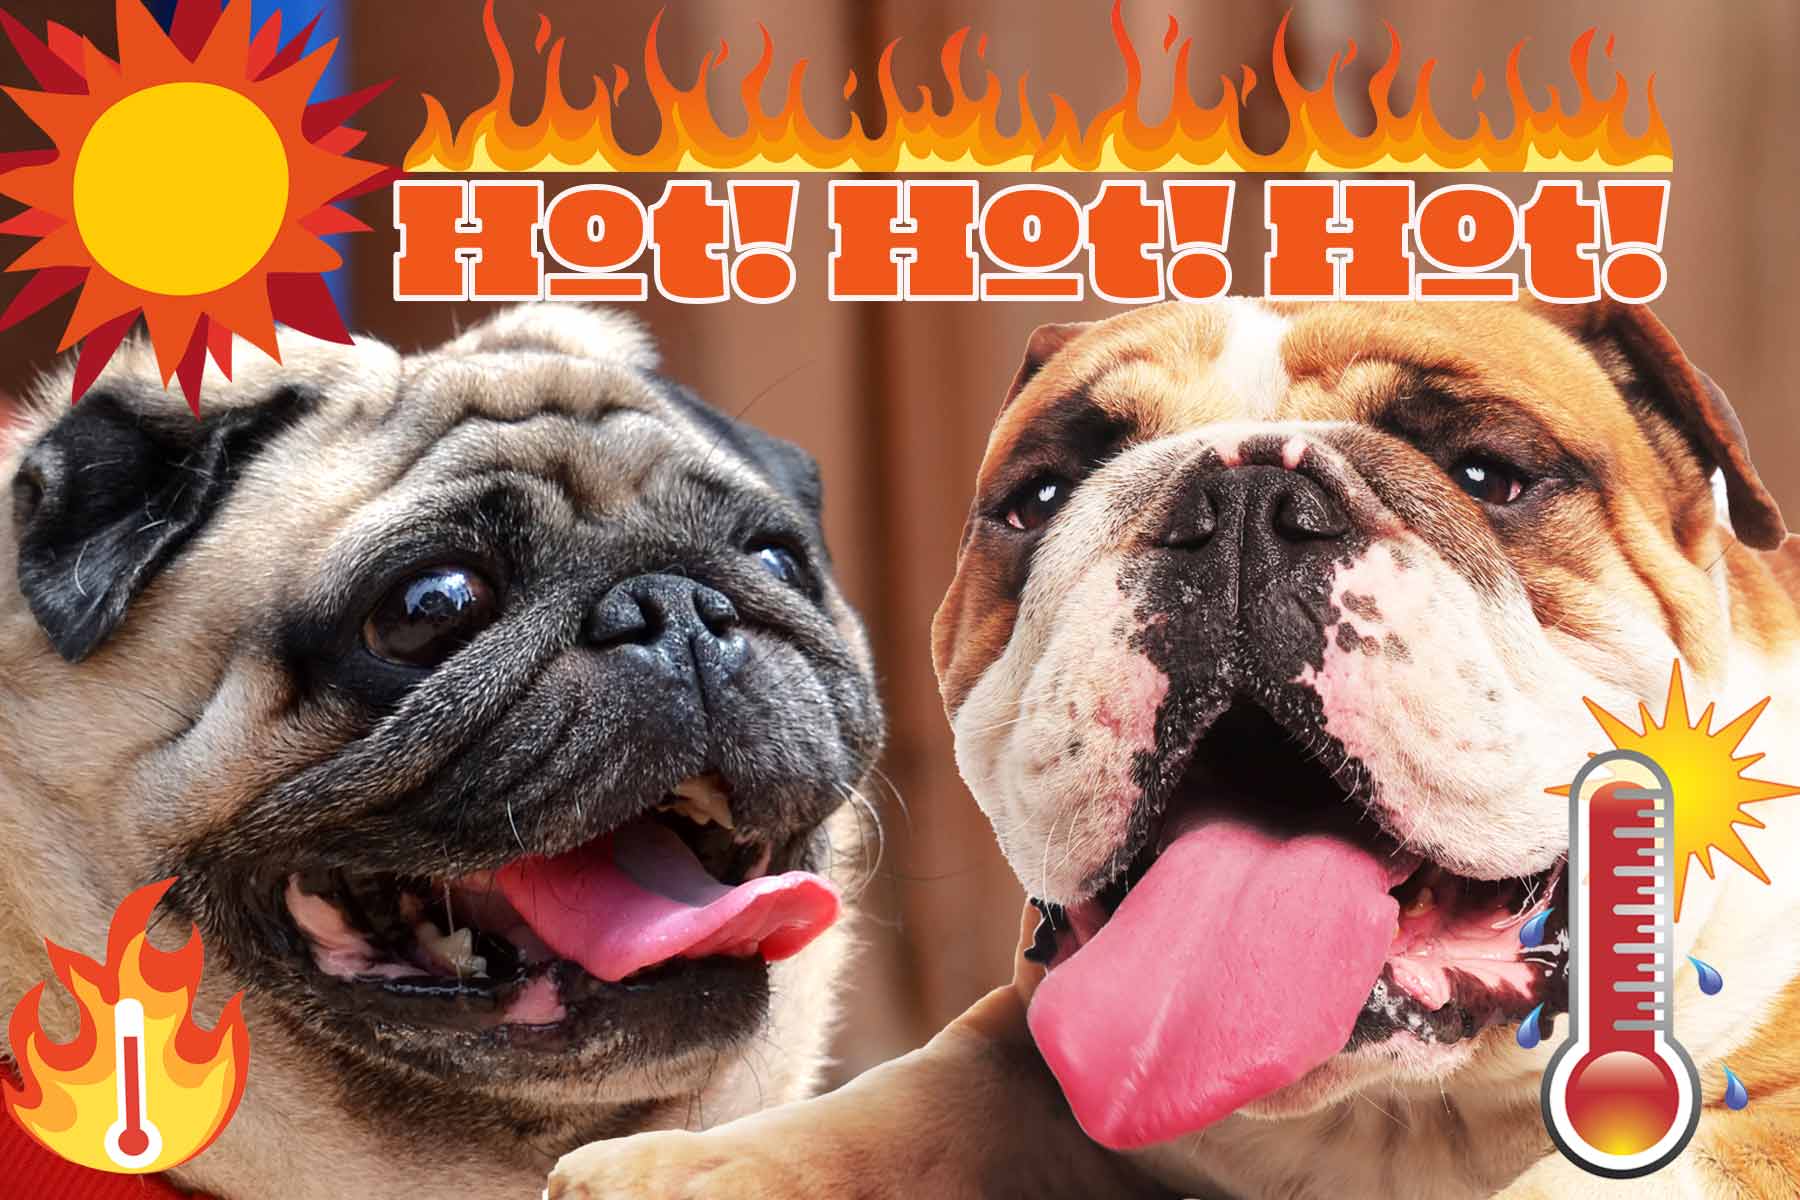 over-heated dogs